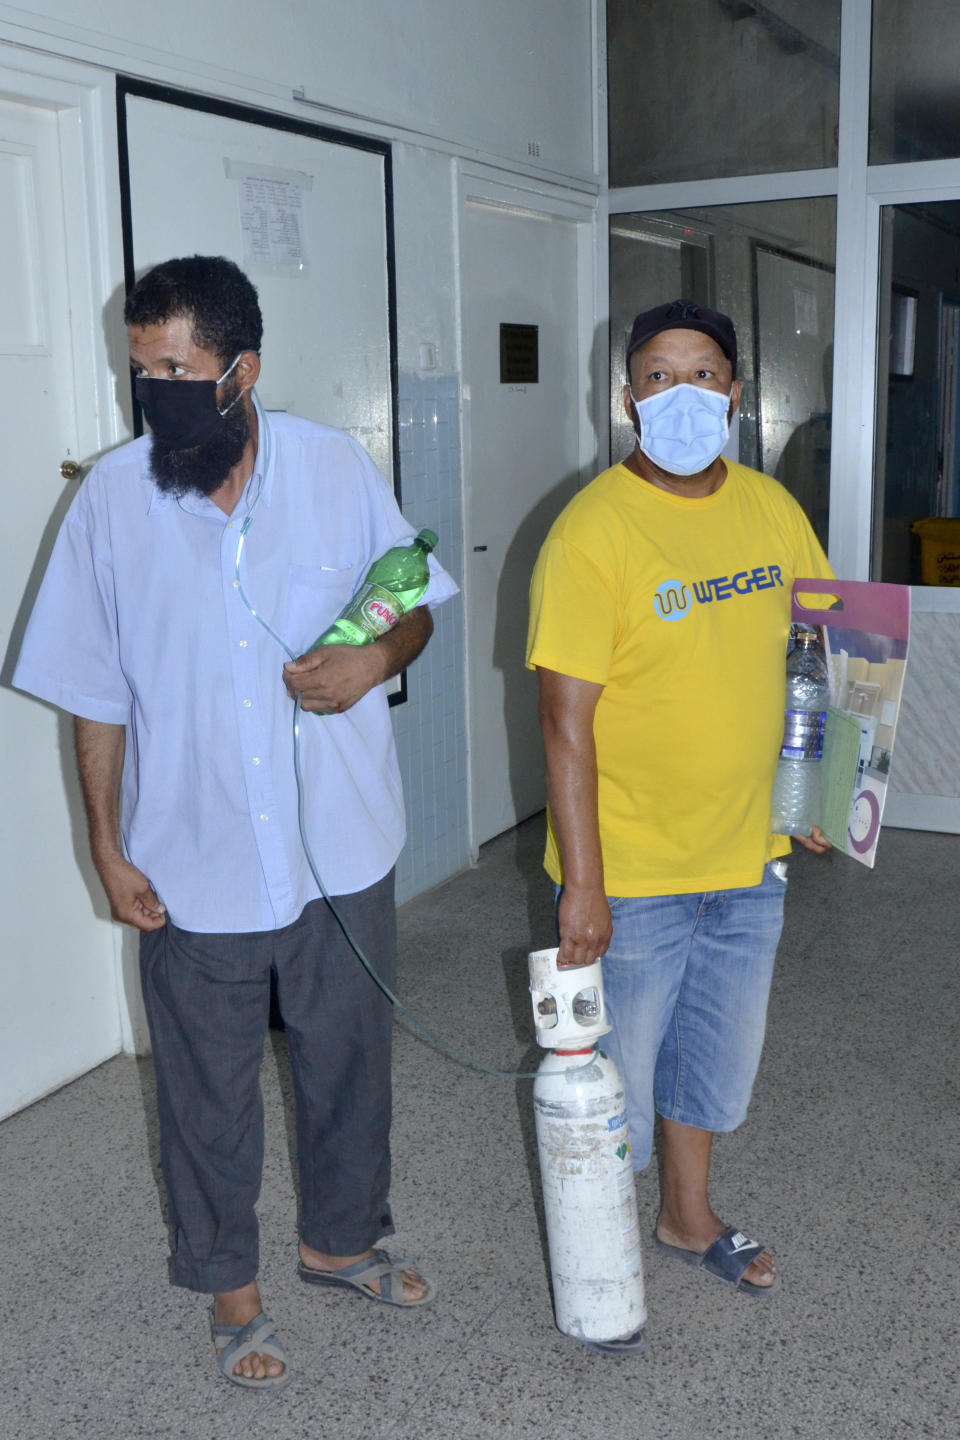 A man infected with the COVID-19 virus, left, is assisted with an oxygen tank in the Iben El Jazzar hospital in Kairouan, Tunisia, Monday, June 28, 2021.Confirmed virus infections in Tunisia have grown sharply over the last month to the highest daily levels since the pandemic began, while the vaccination rate remains low, according to data from John's Hopkins University. The data indicate that Tunisia has reported Africa's highest per-capita death toll from the pandemic, and is currently recording one of the highest per-capita infection rates in Africa. (Photo/Aimen Othmani)